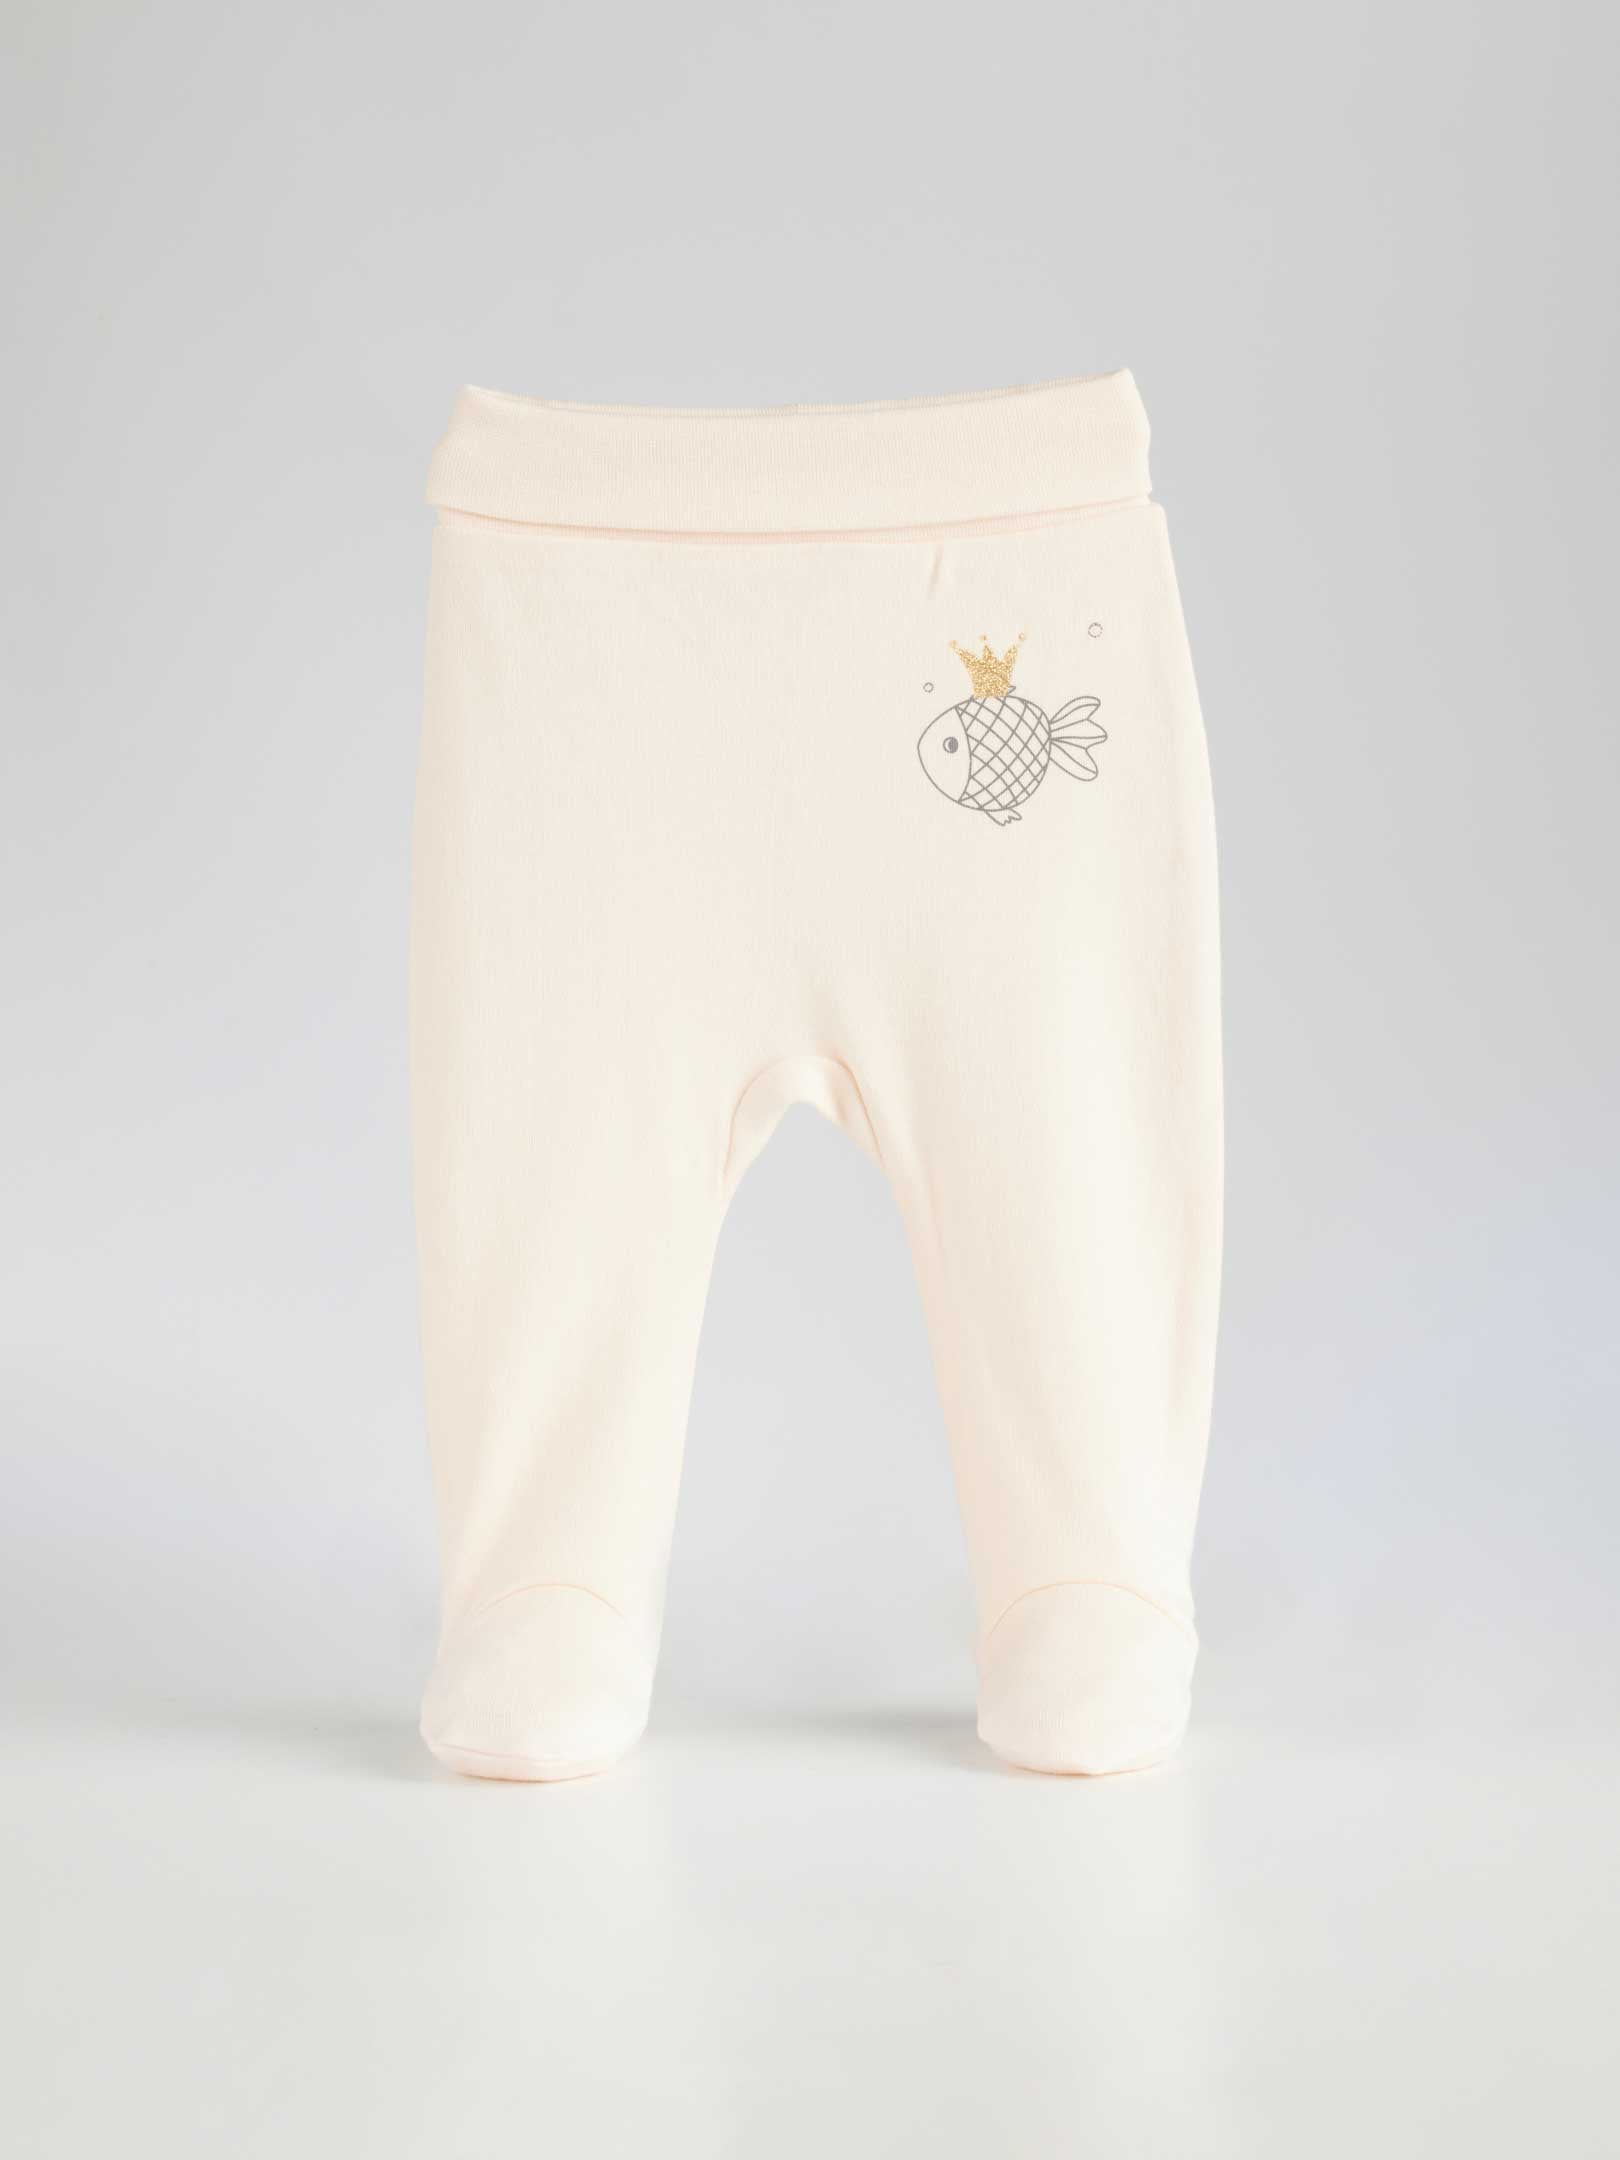 Infant pants model Godl Fish 305 made from high quality 100% cotton have a nice warm color and a cute fish with a golden crown on the left sitde of the pants 